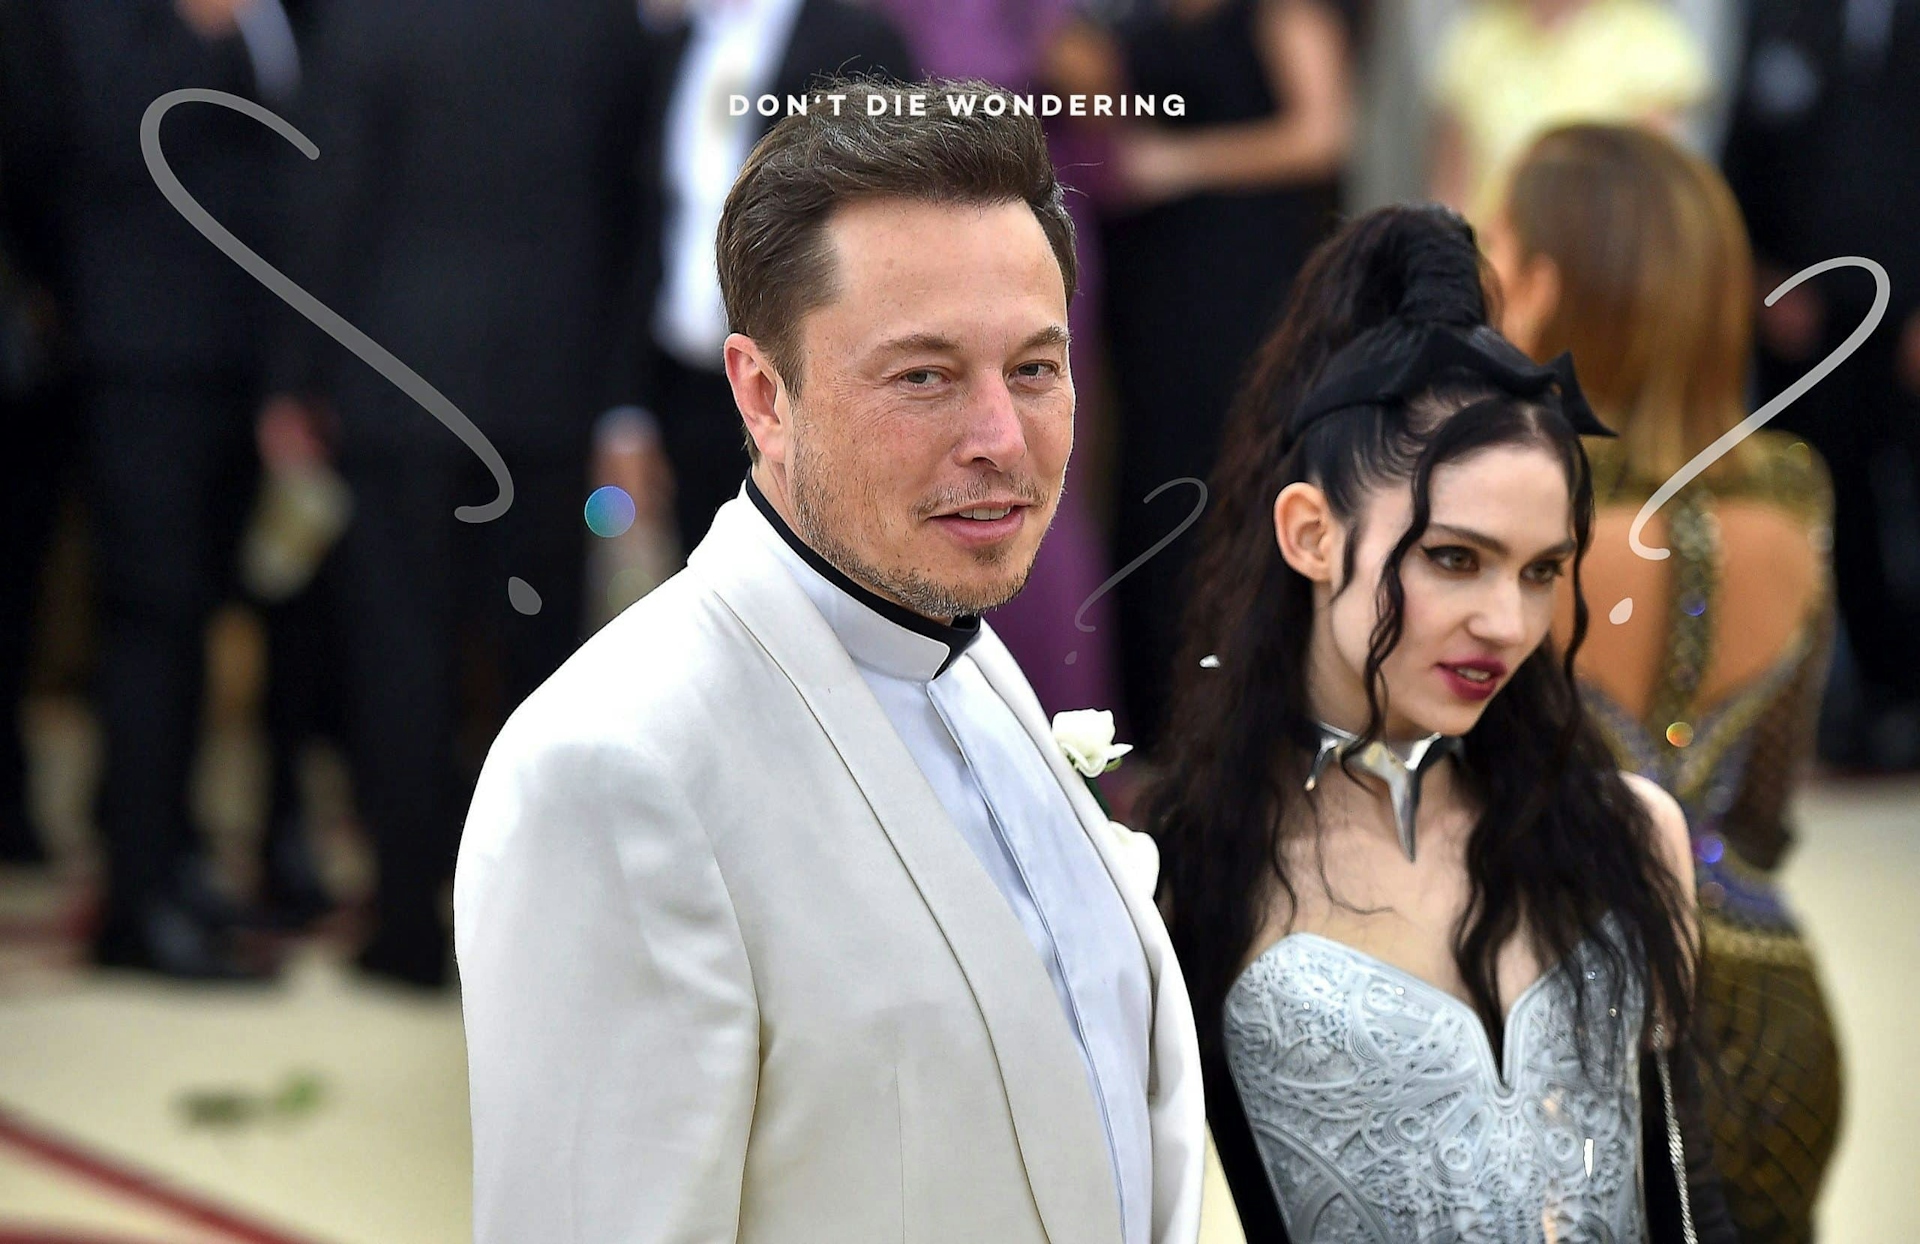 Why Does Grimes Keep Apologising For Being With Elon Musk?